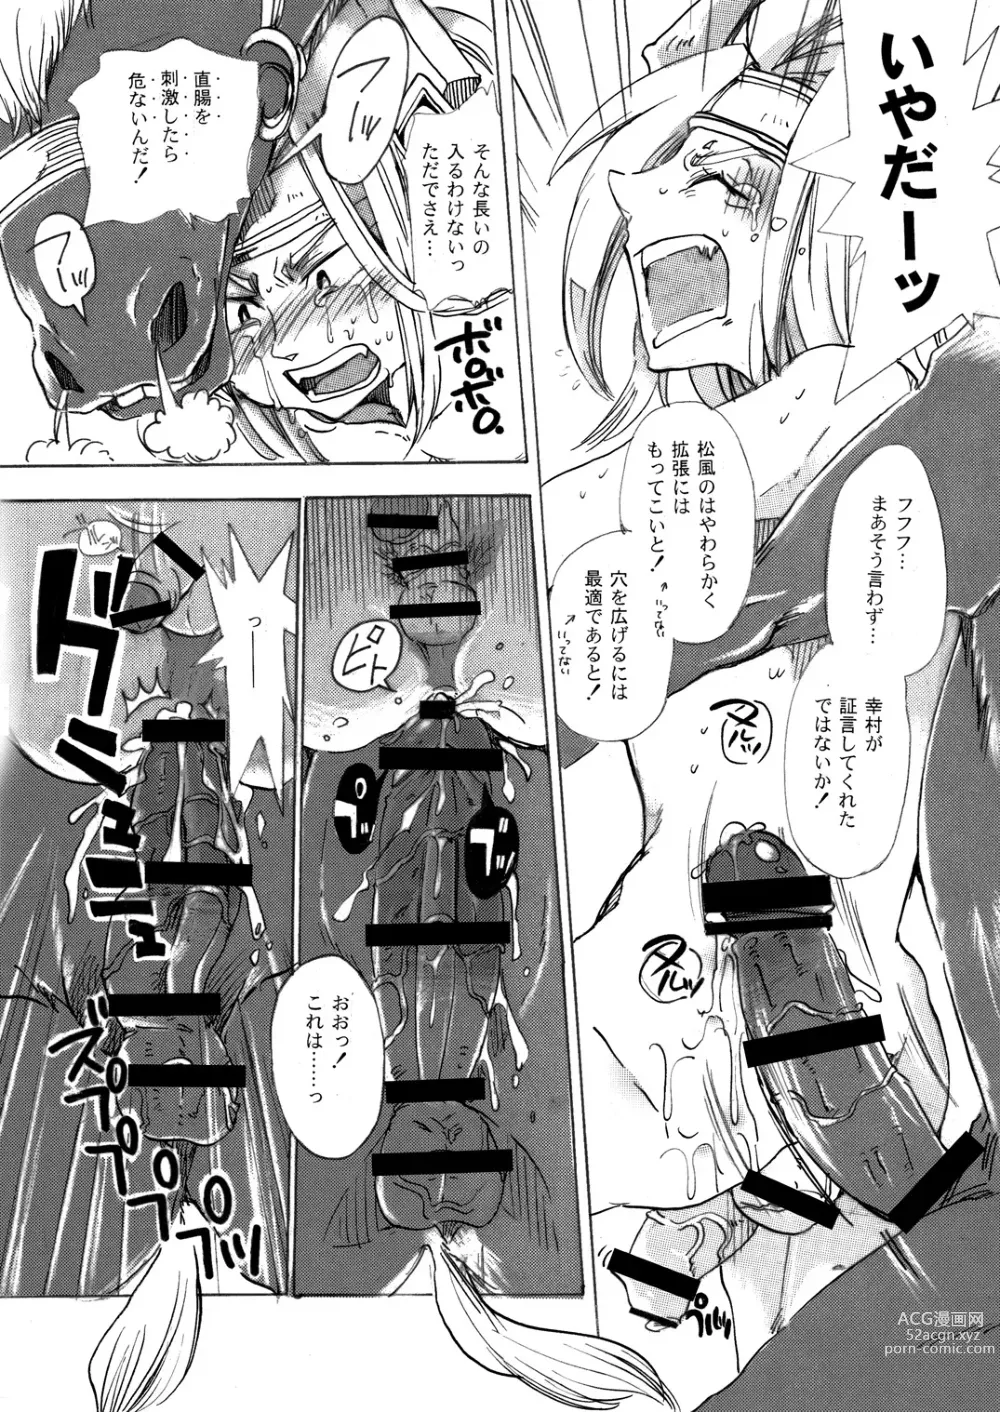 Page 53 of doujinshi MANIACCESS